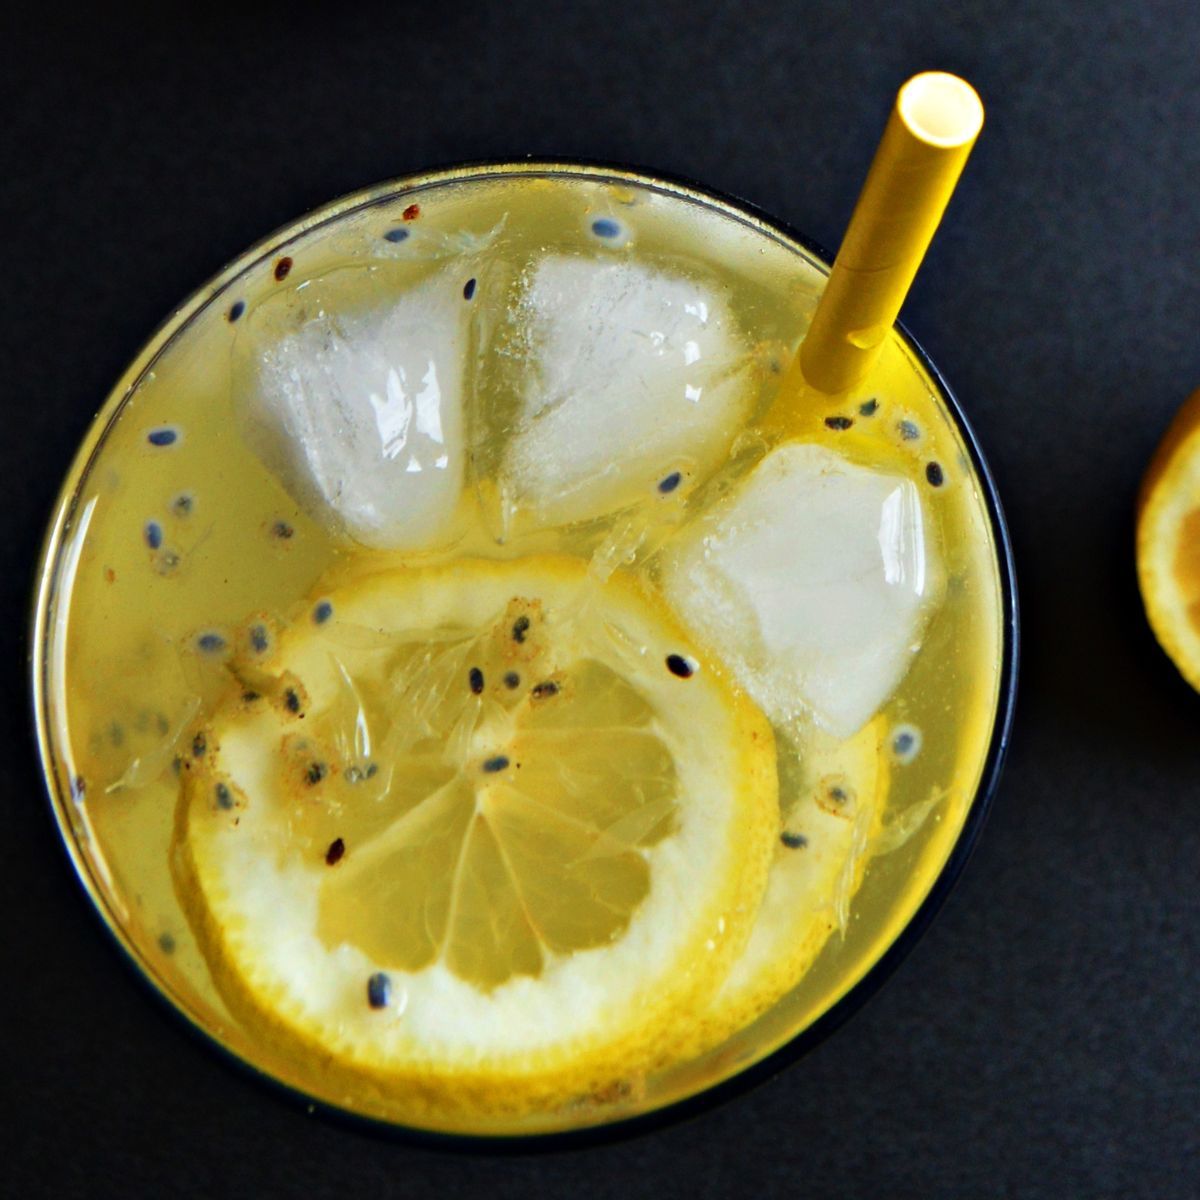 Simple lemonade with basil seeds - Flavours Treat